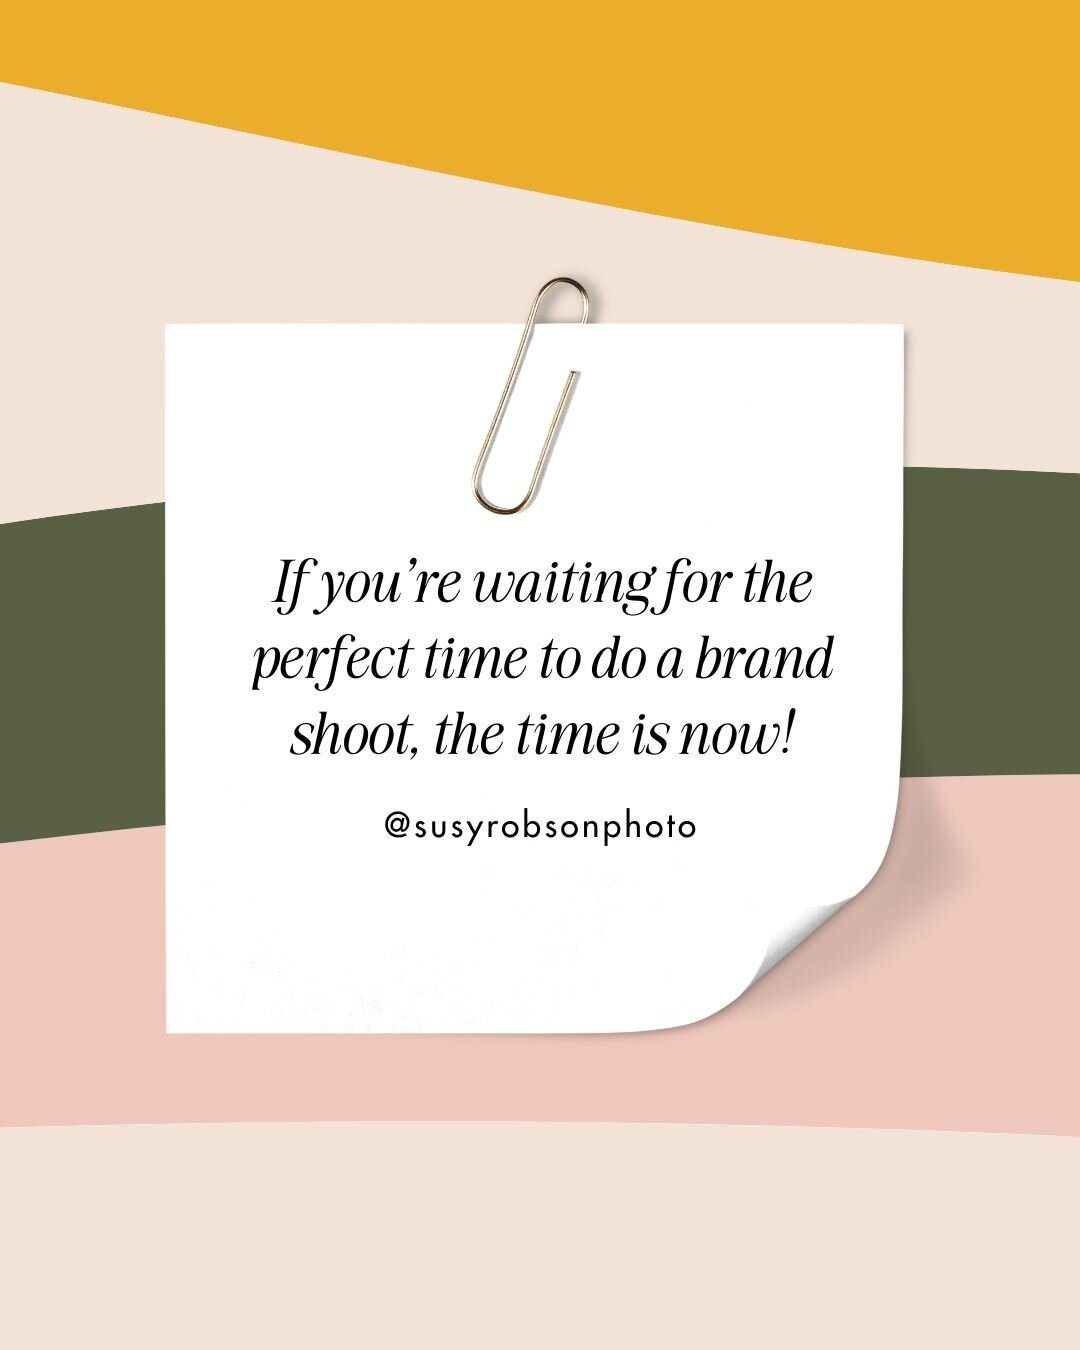 Hey Beautiful Souls! 🌟⁣
⁣
Are you still waiting for the elusive &quot;perfect time&quot; to get those stunning brand photos done? Well, guess what? The perfect time is NOW!  Stop delaying, because your journey is worth documenting in all its glory.⁣